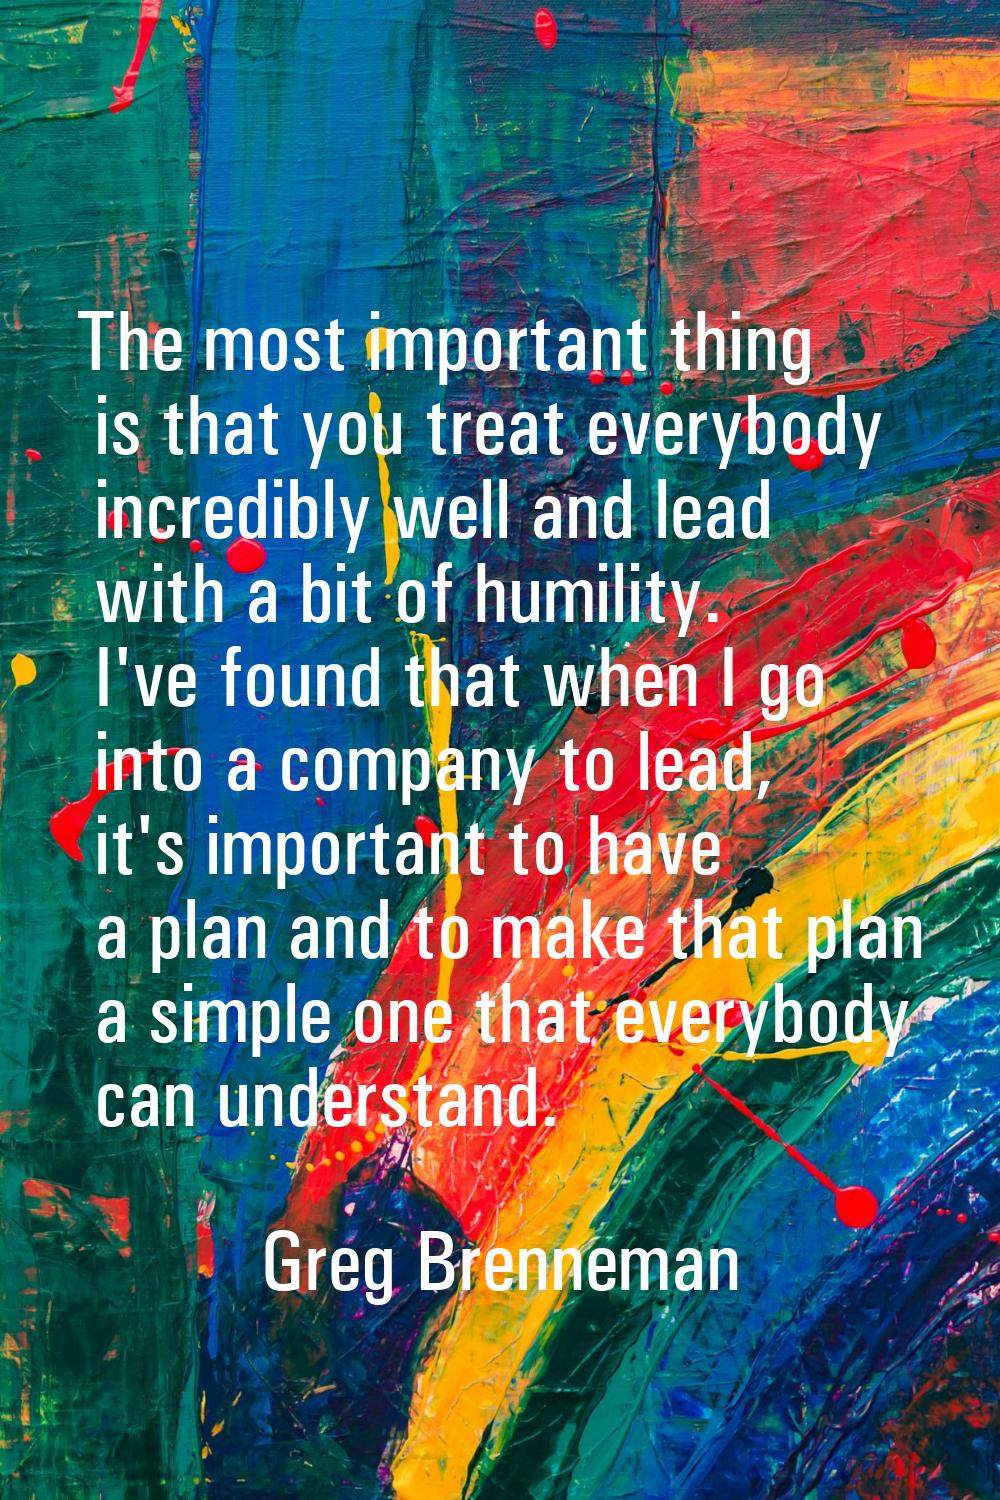 The most important thing is that you treat everybody incredibly well and lead with a bit of humilit